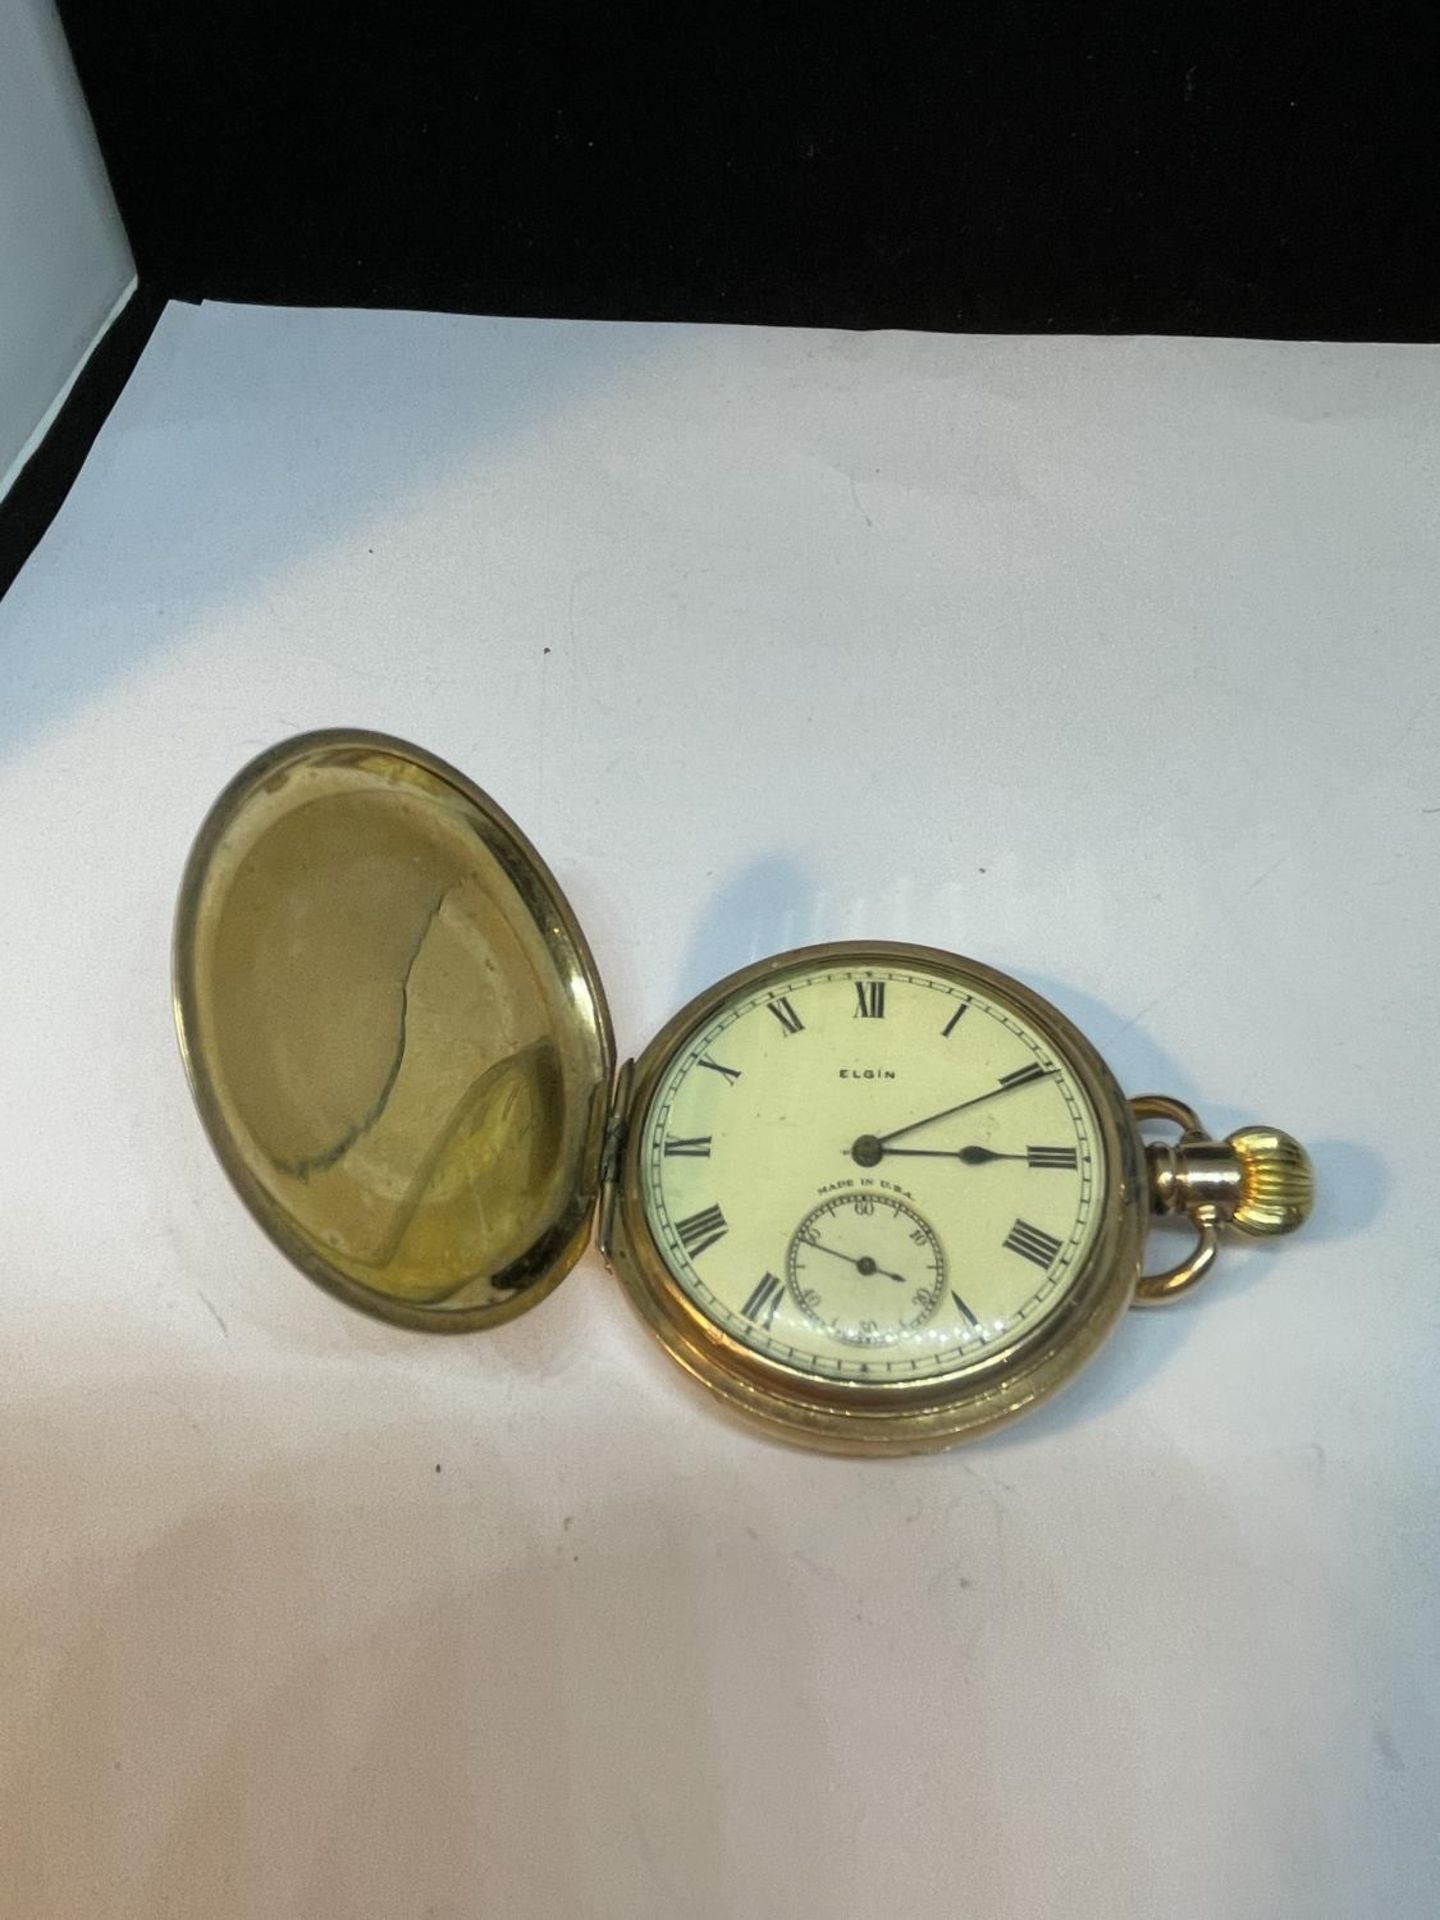 A GOLD PLATED ELGIN POCKET WATCH SEEN WORKING BUT NO WARRANTY